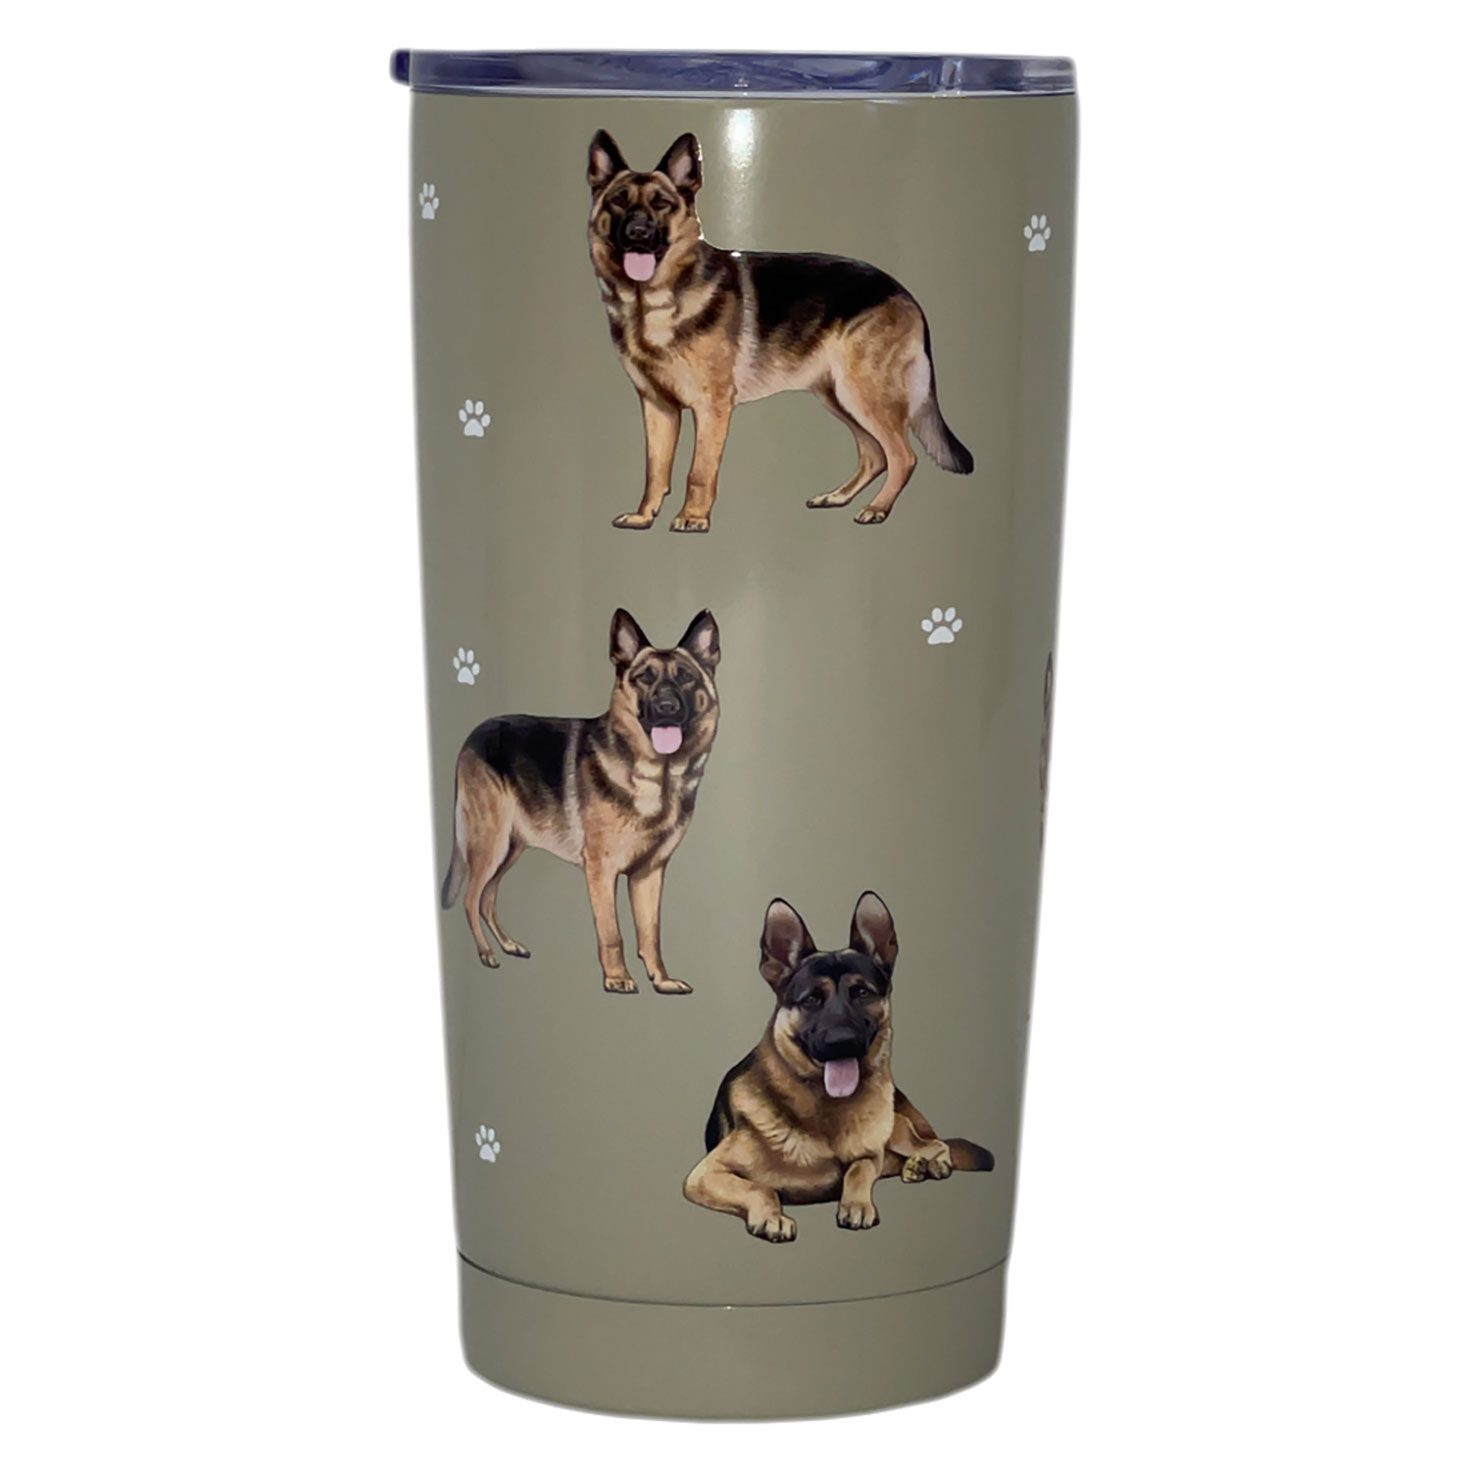 https://www.hallmark.com/dw/image/v2/AALB_PRD/on/demandware.static/-/Sites-hallmark-master/default/dw0a57701e/images/finished-goods/products/11575/German-Shepherds-on-Tan-Stainless-Steel-Tumbler_11575_01.jpg?sfrm=jpg